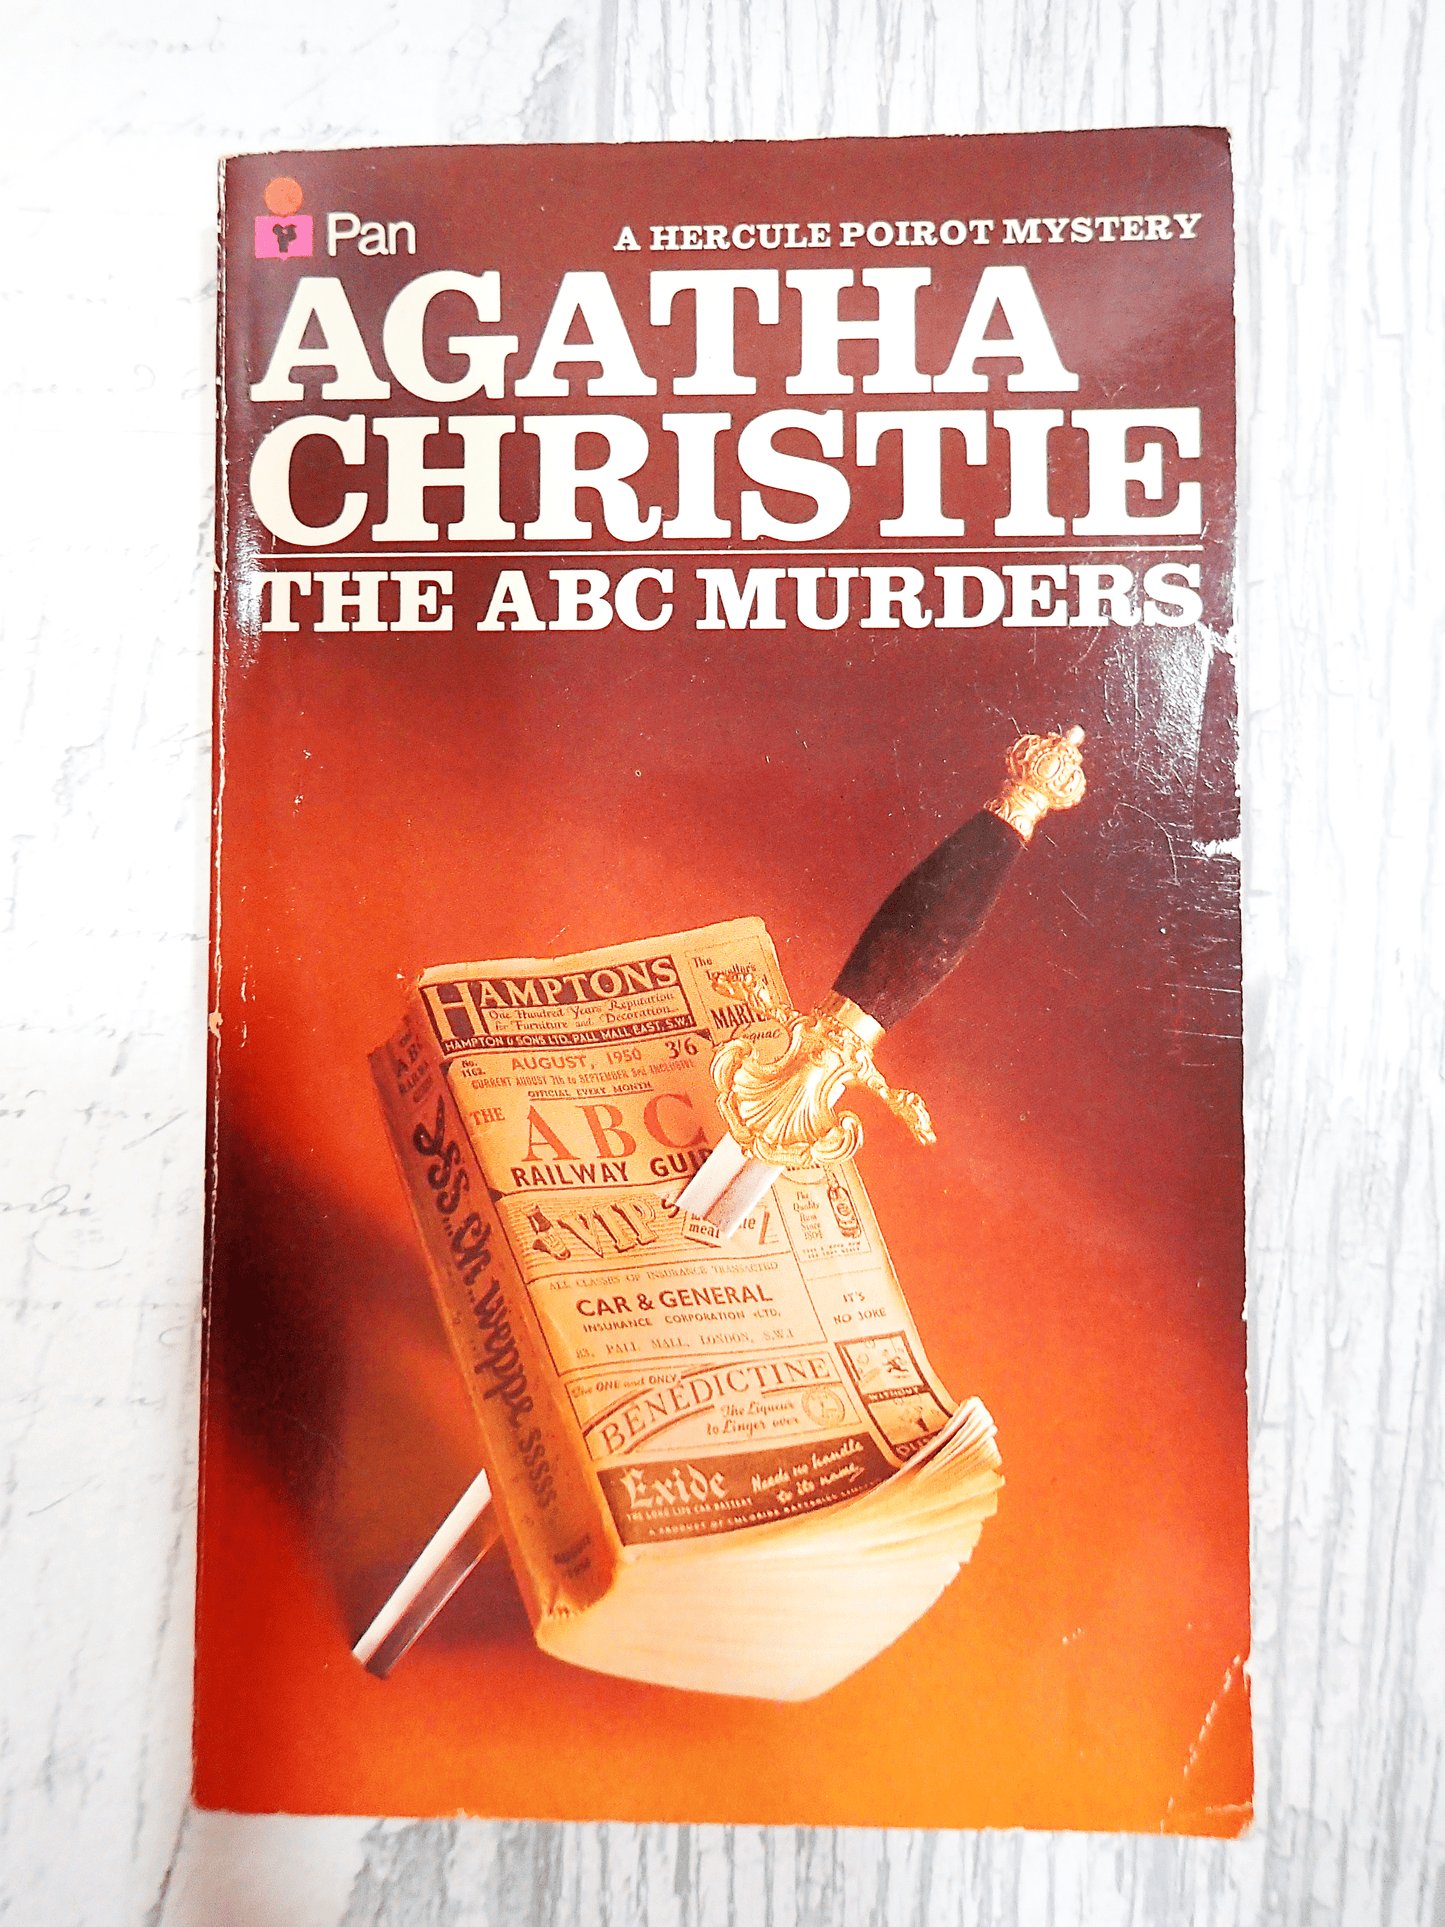 Front Cover of Agatha Christie The ABC Murders, Vintage Pan Paperback Book. Classic Crime Fiction. Showing an ABC Railway guide with a dagger through it against a blood red against a light coloured background.